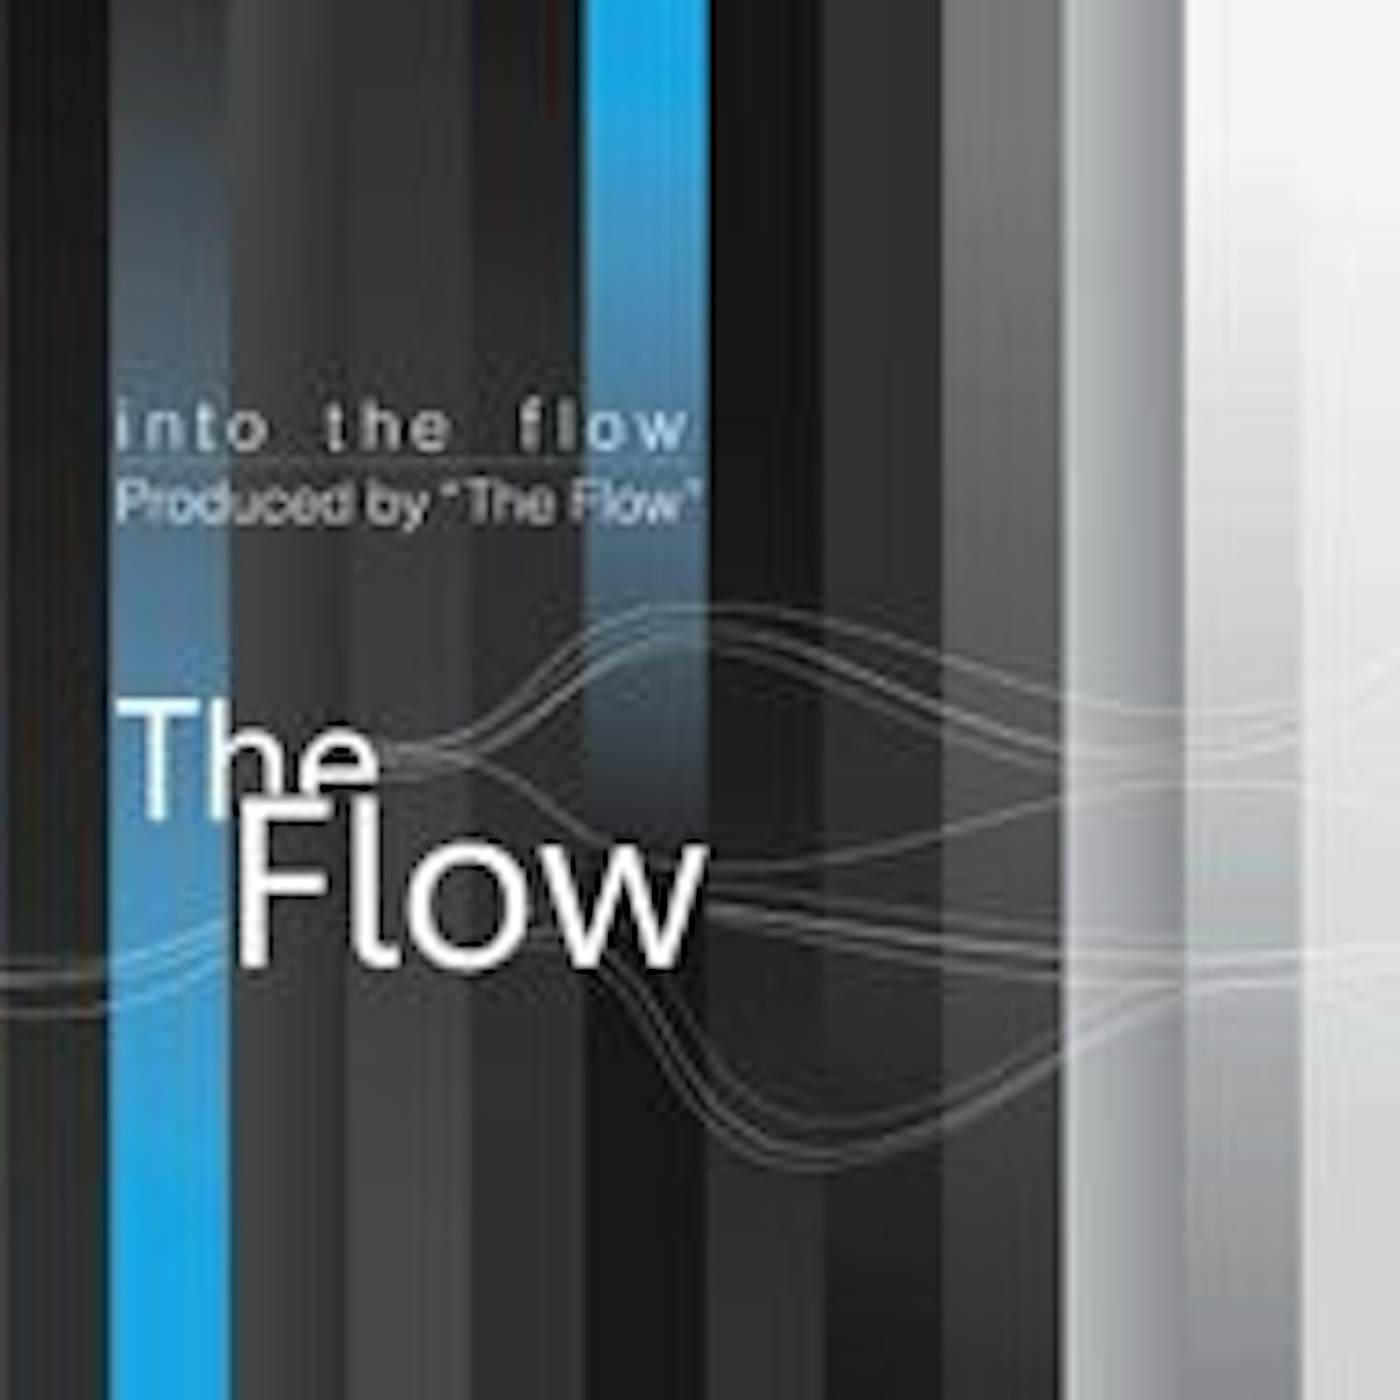 INTO THE FLOW CD